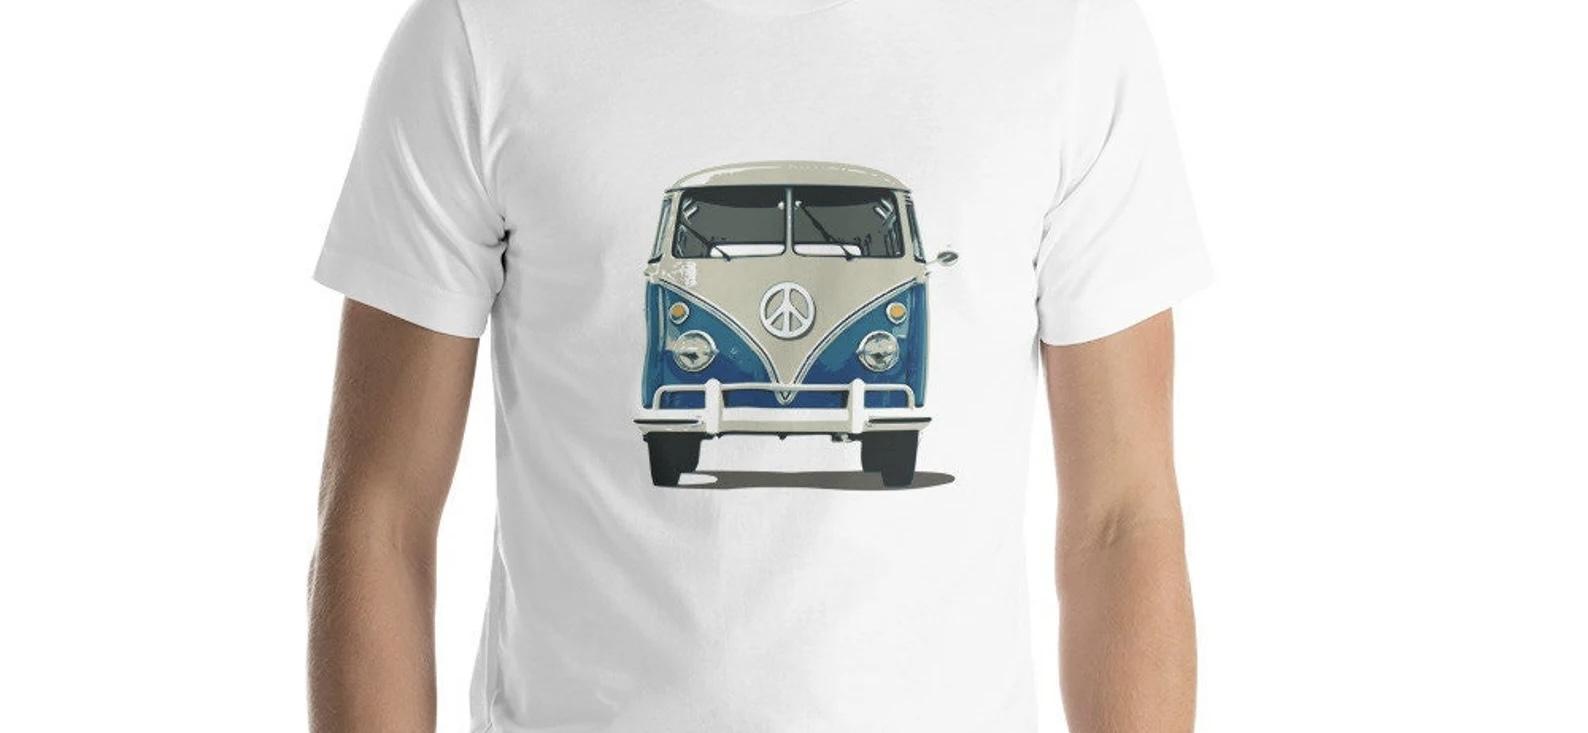 Get This VW Bus T-Shirt: Anniversary Gift For Him